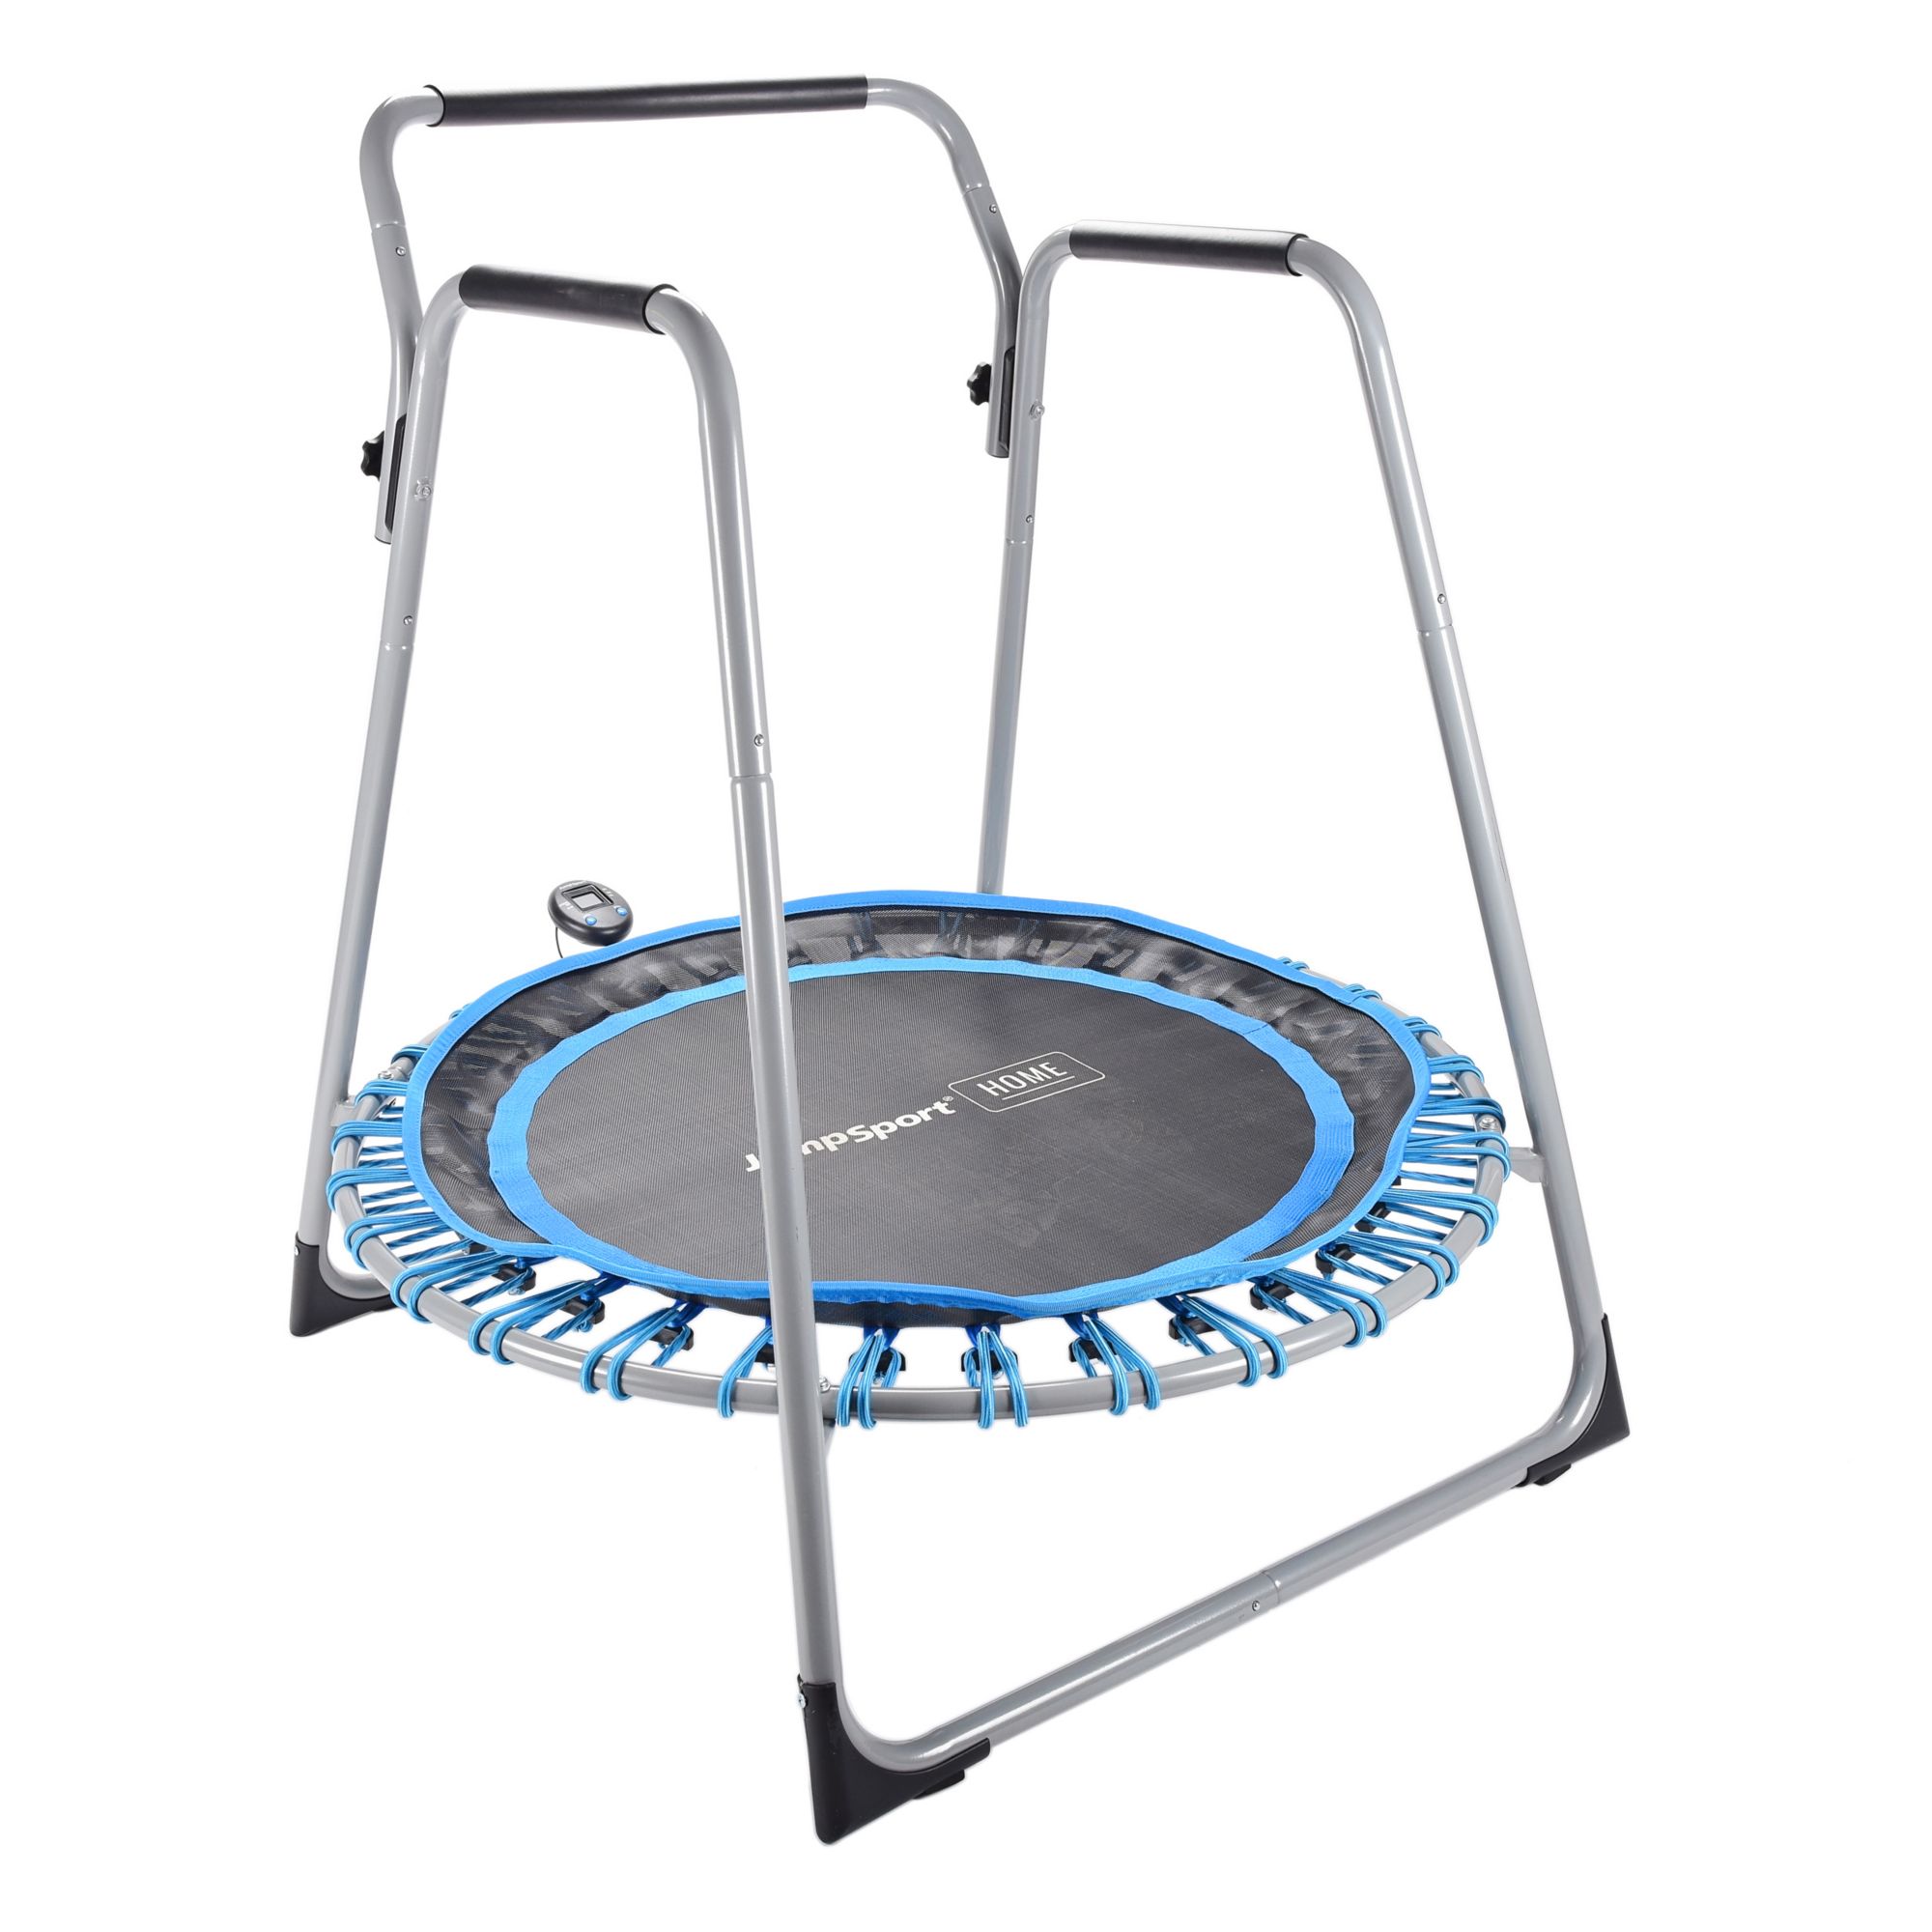 JUMPSPORT Cardio Workout Home Fitness Trampoline RBJ-S-22010-00 - The Home  Depot